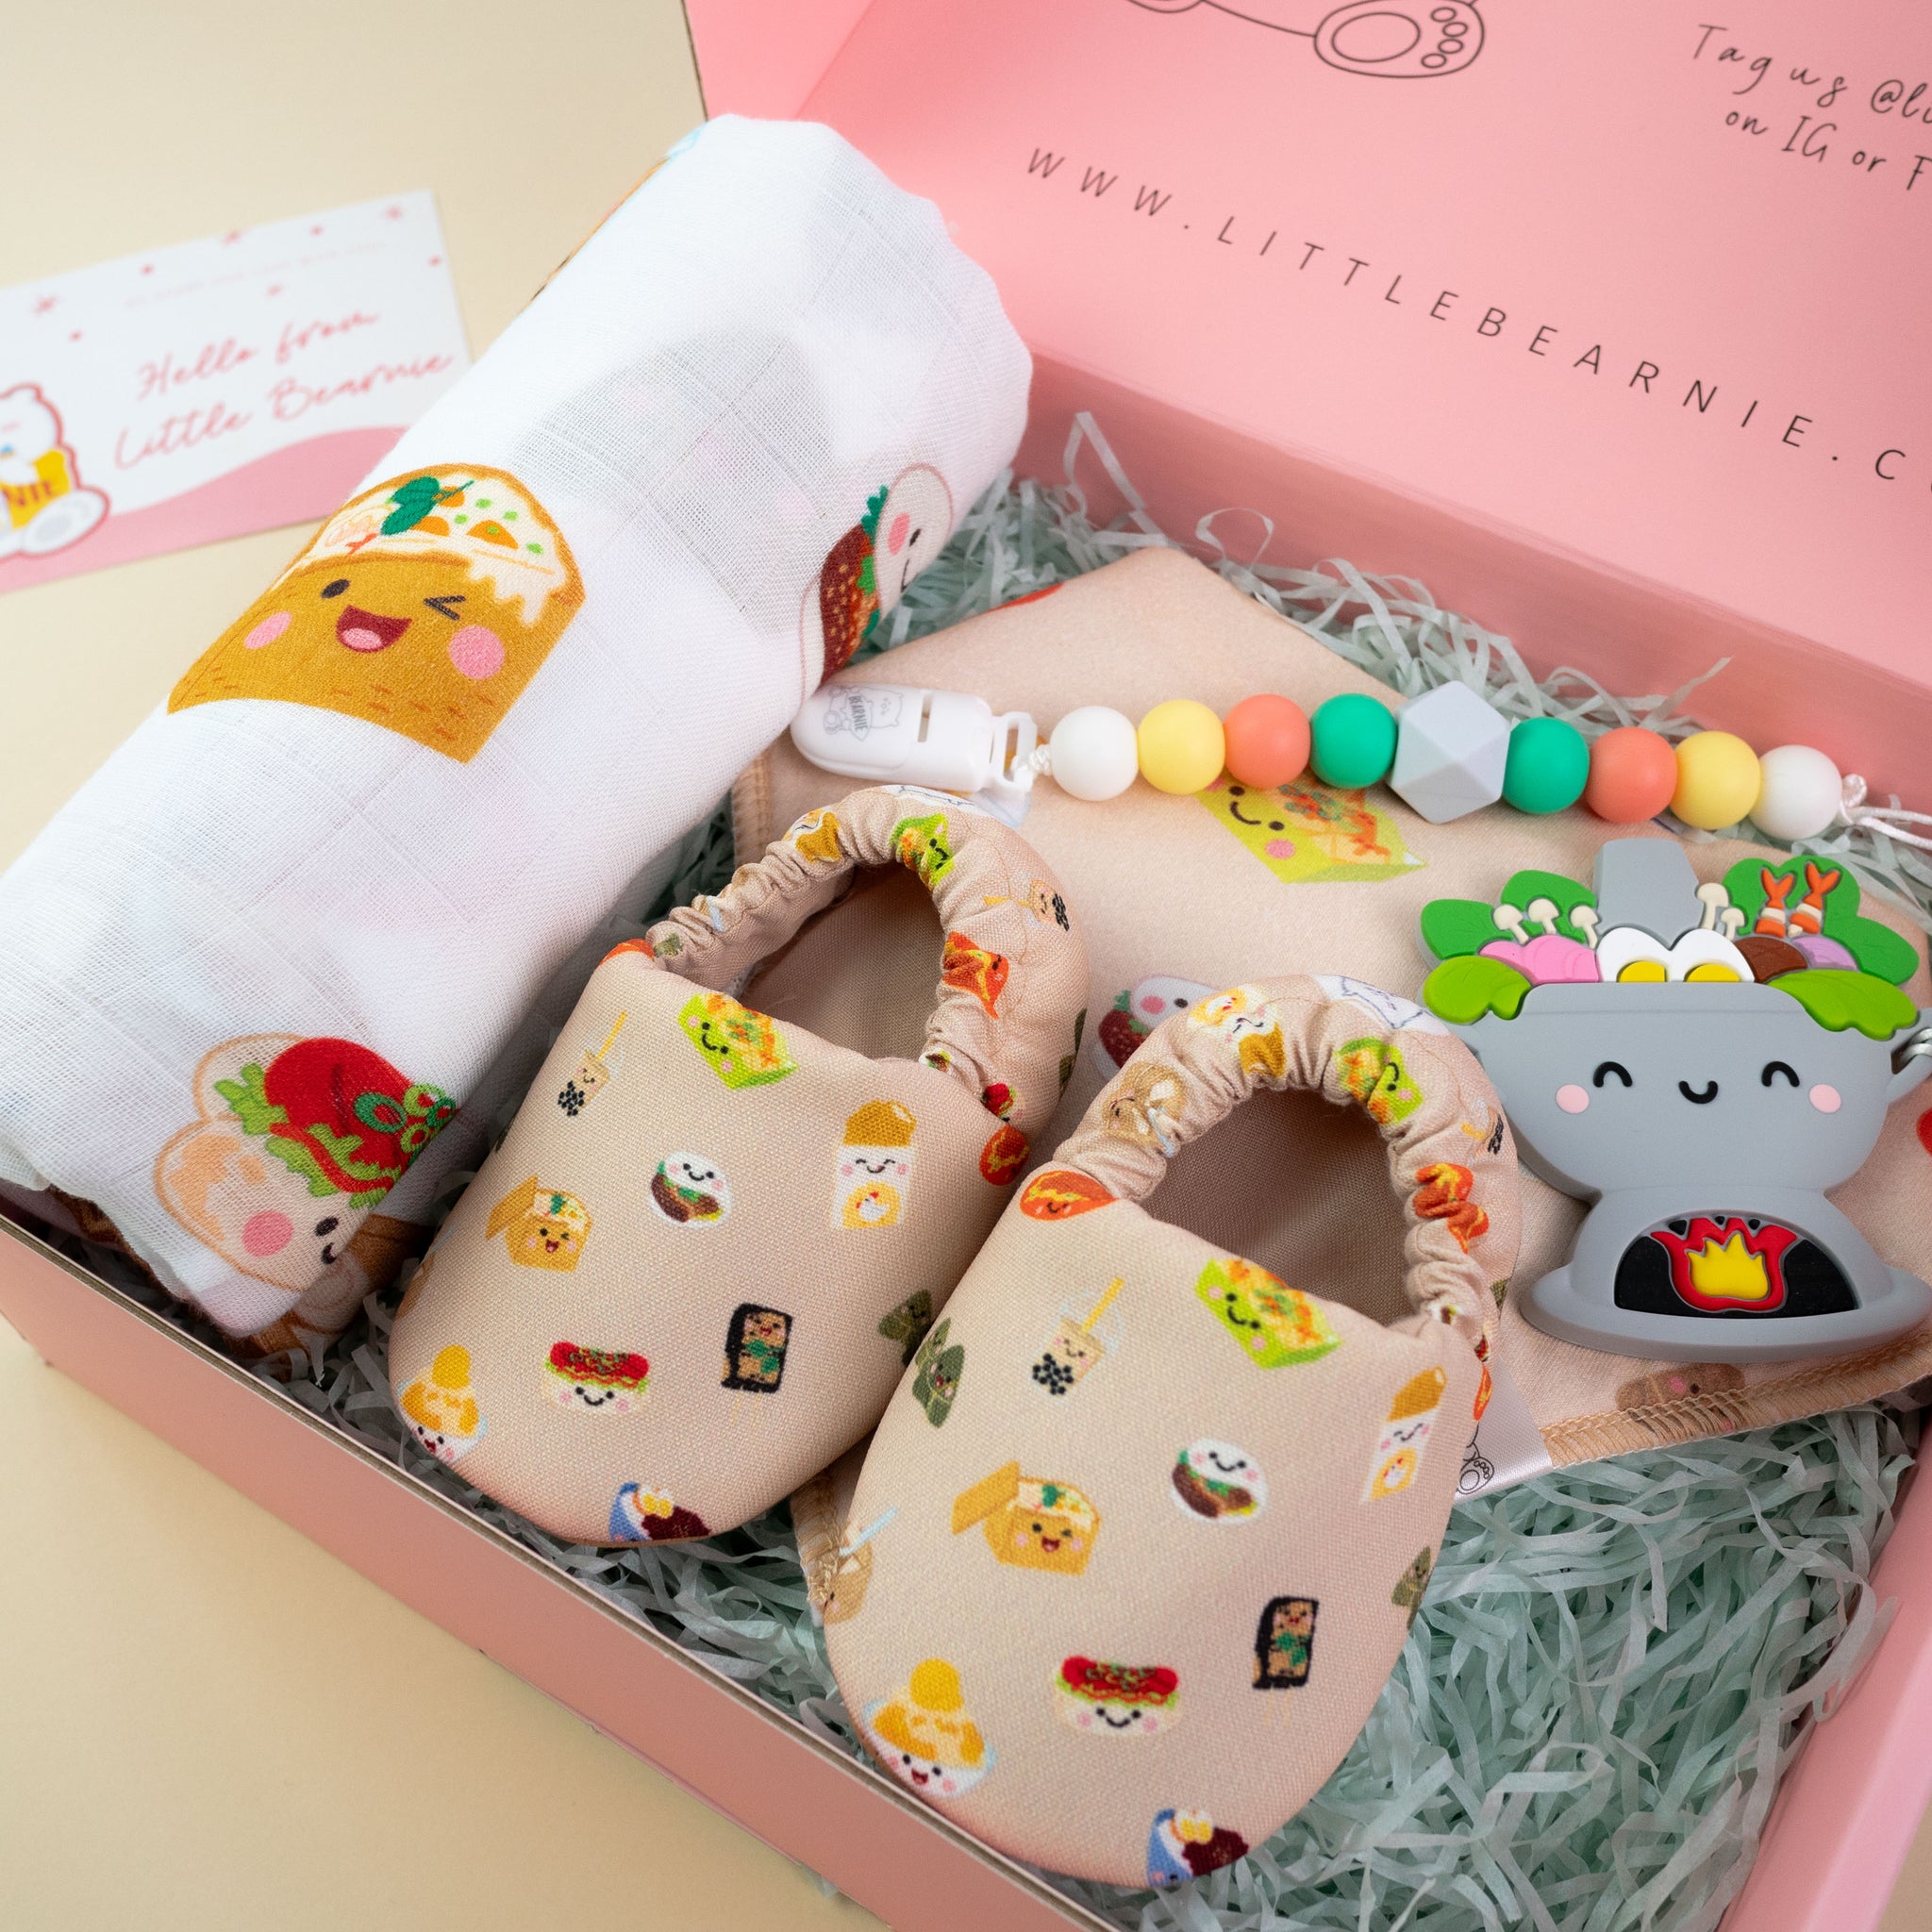 Hello Little One - Baby Luxe Gift Set (Taiwan Foodies Series)